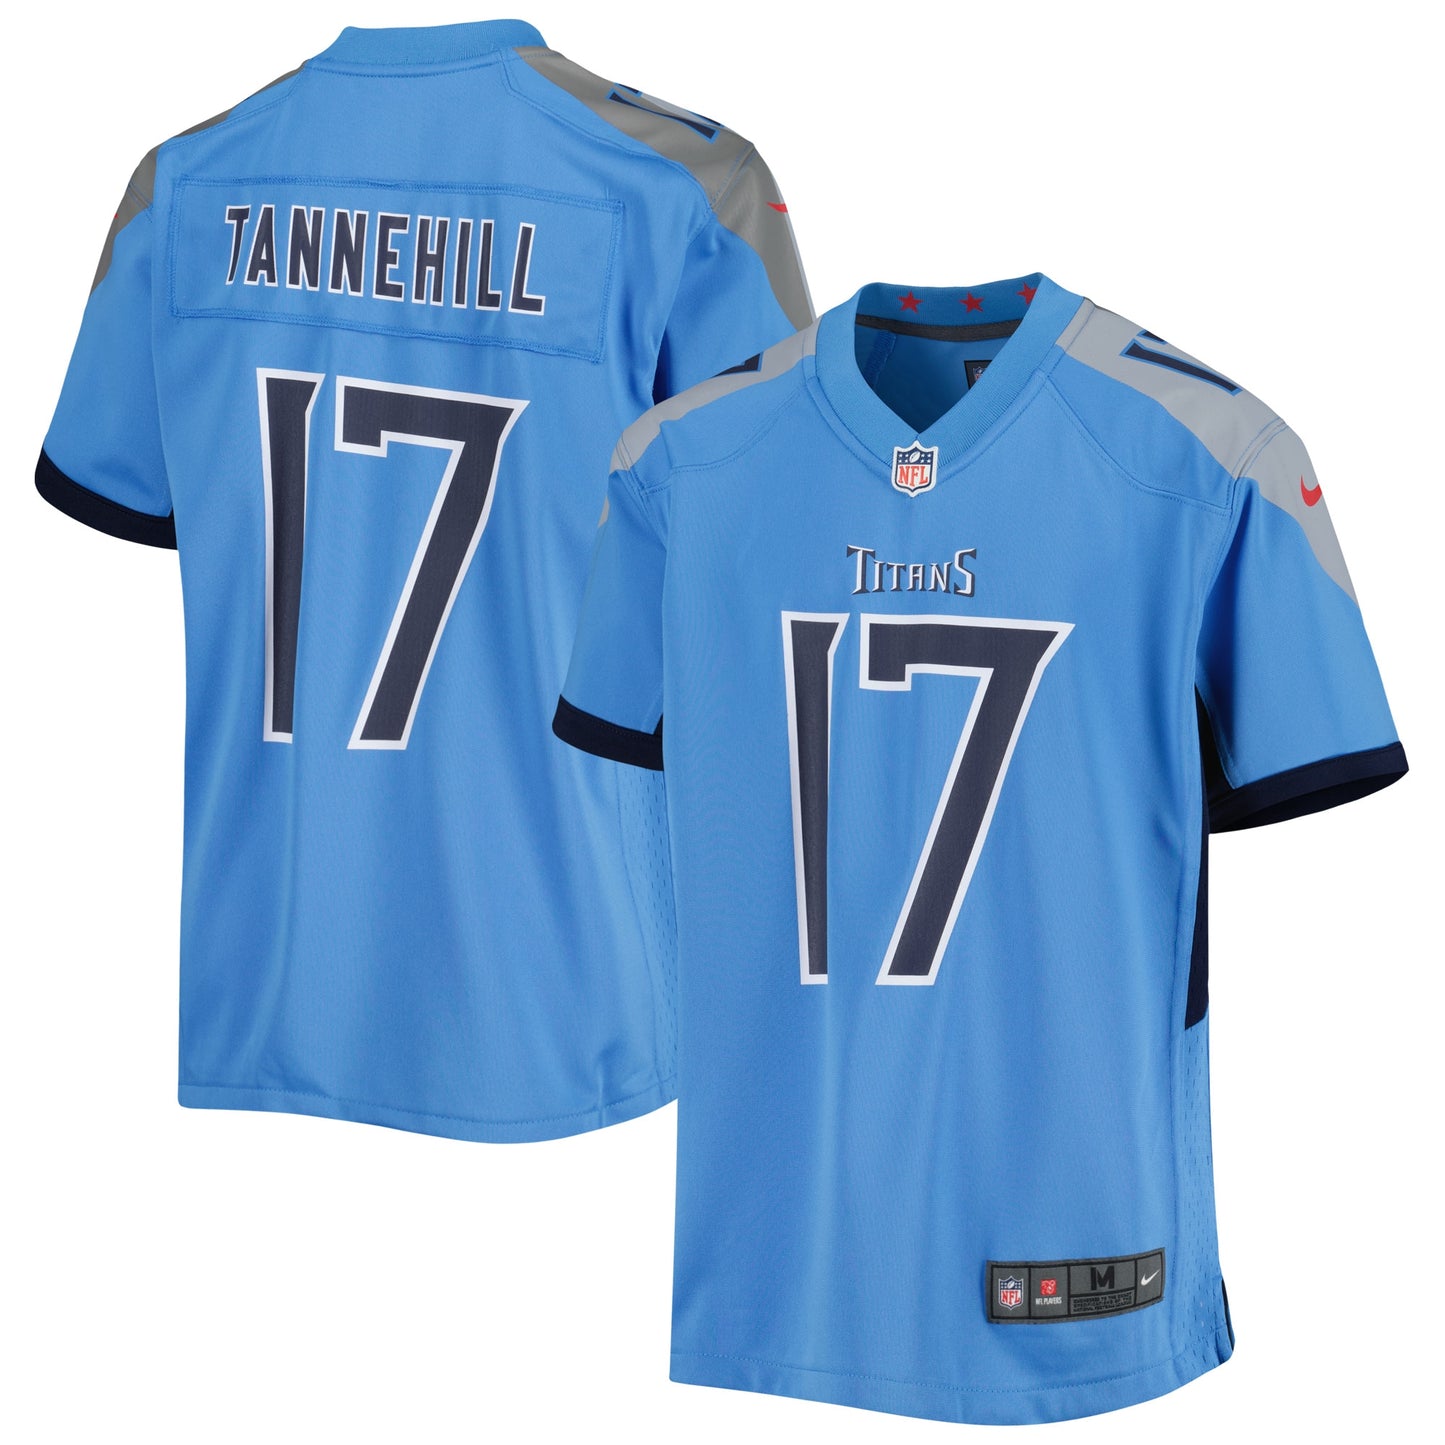 Ryan Tannehill Tennessee Titans Nike Youth Game Jersey - Light Blue